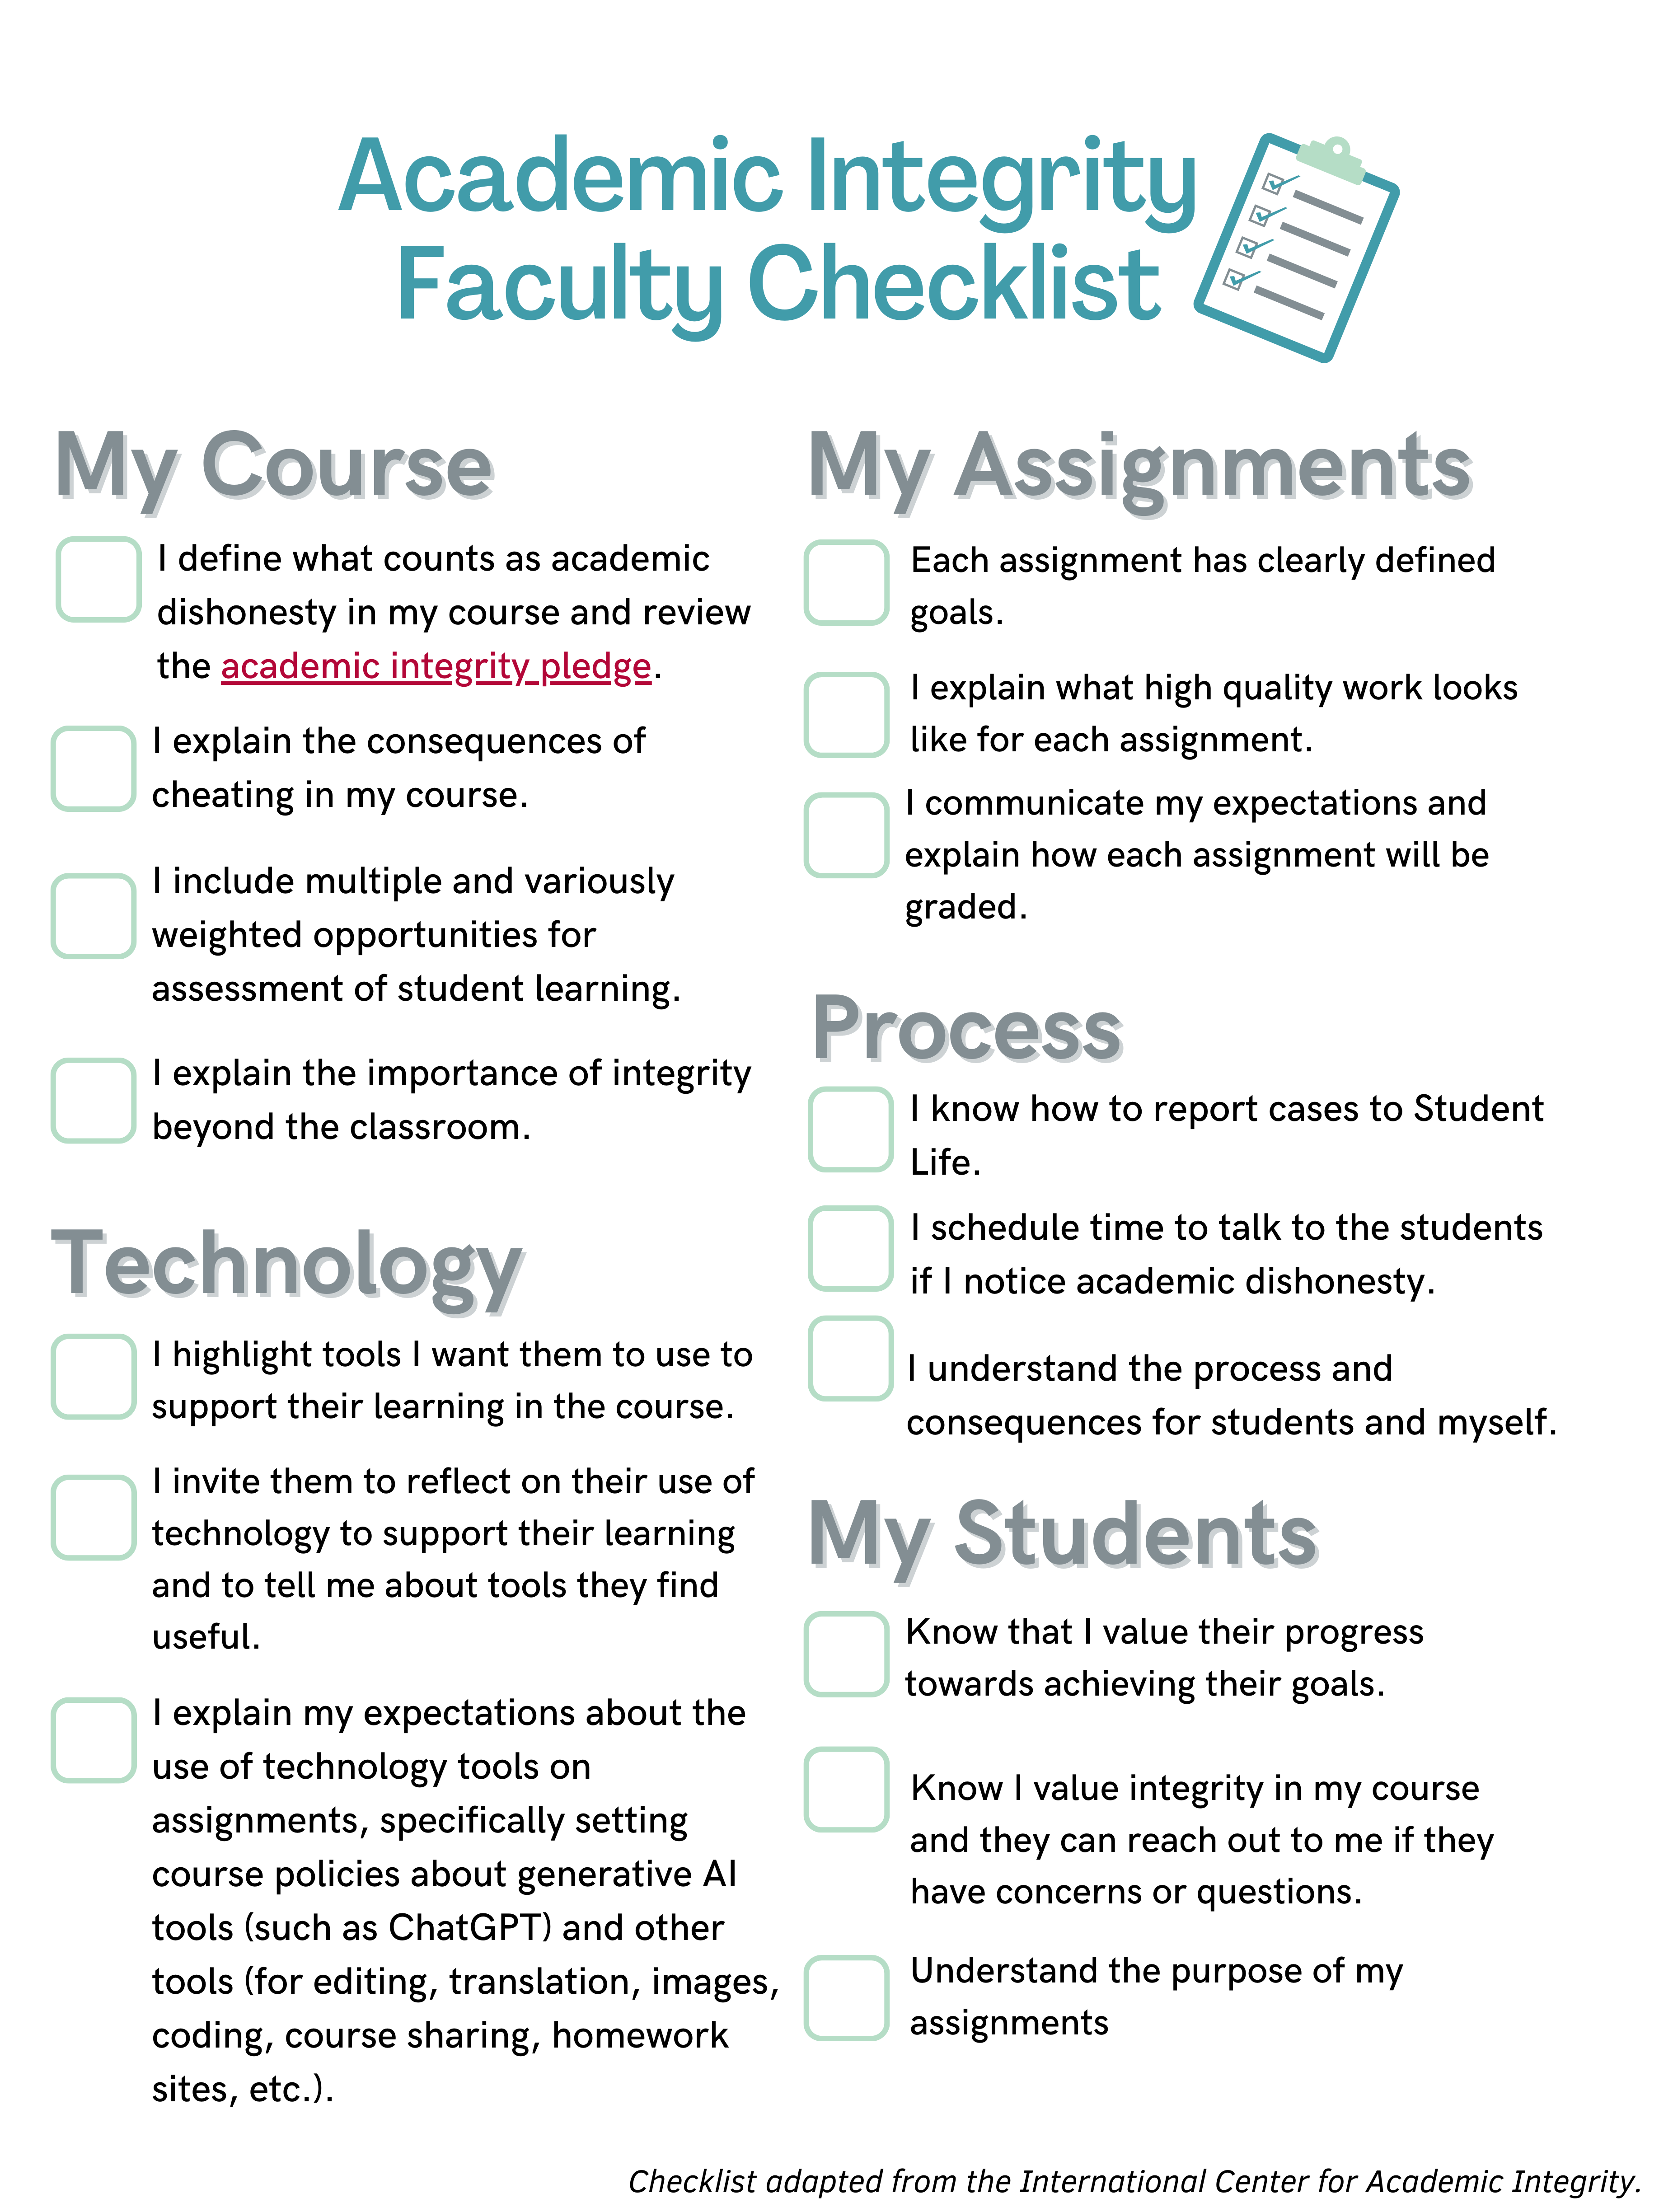 image form of academic integrity checklist